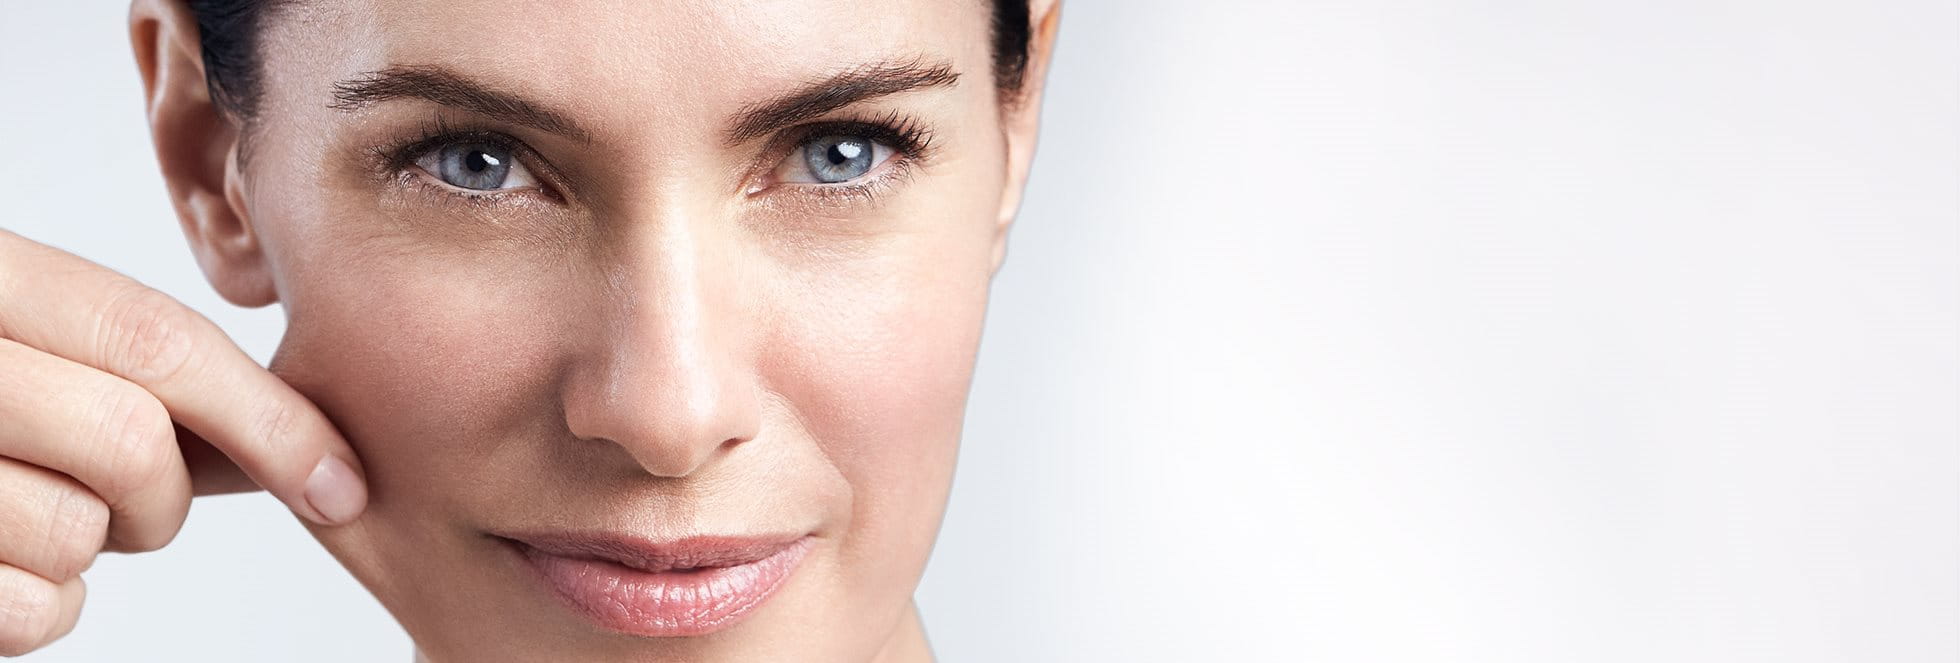 How to Reduce Wrinkles